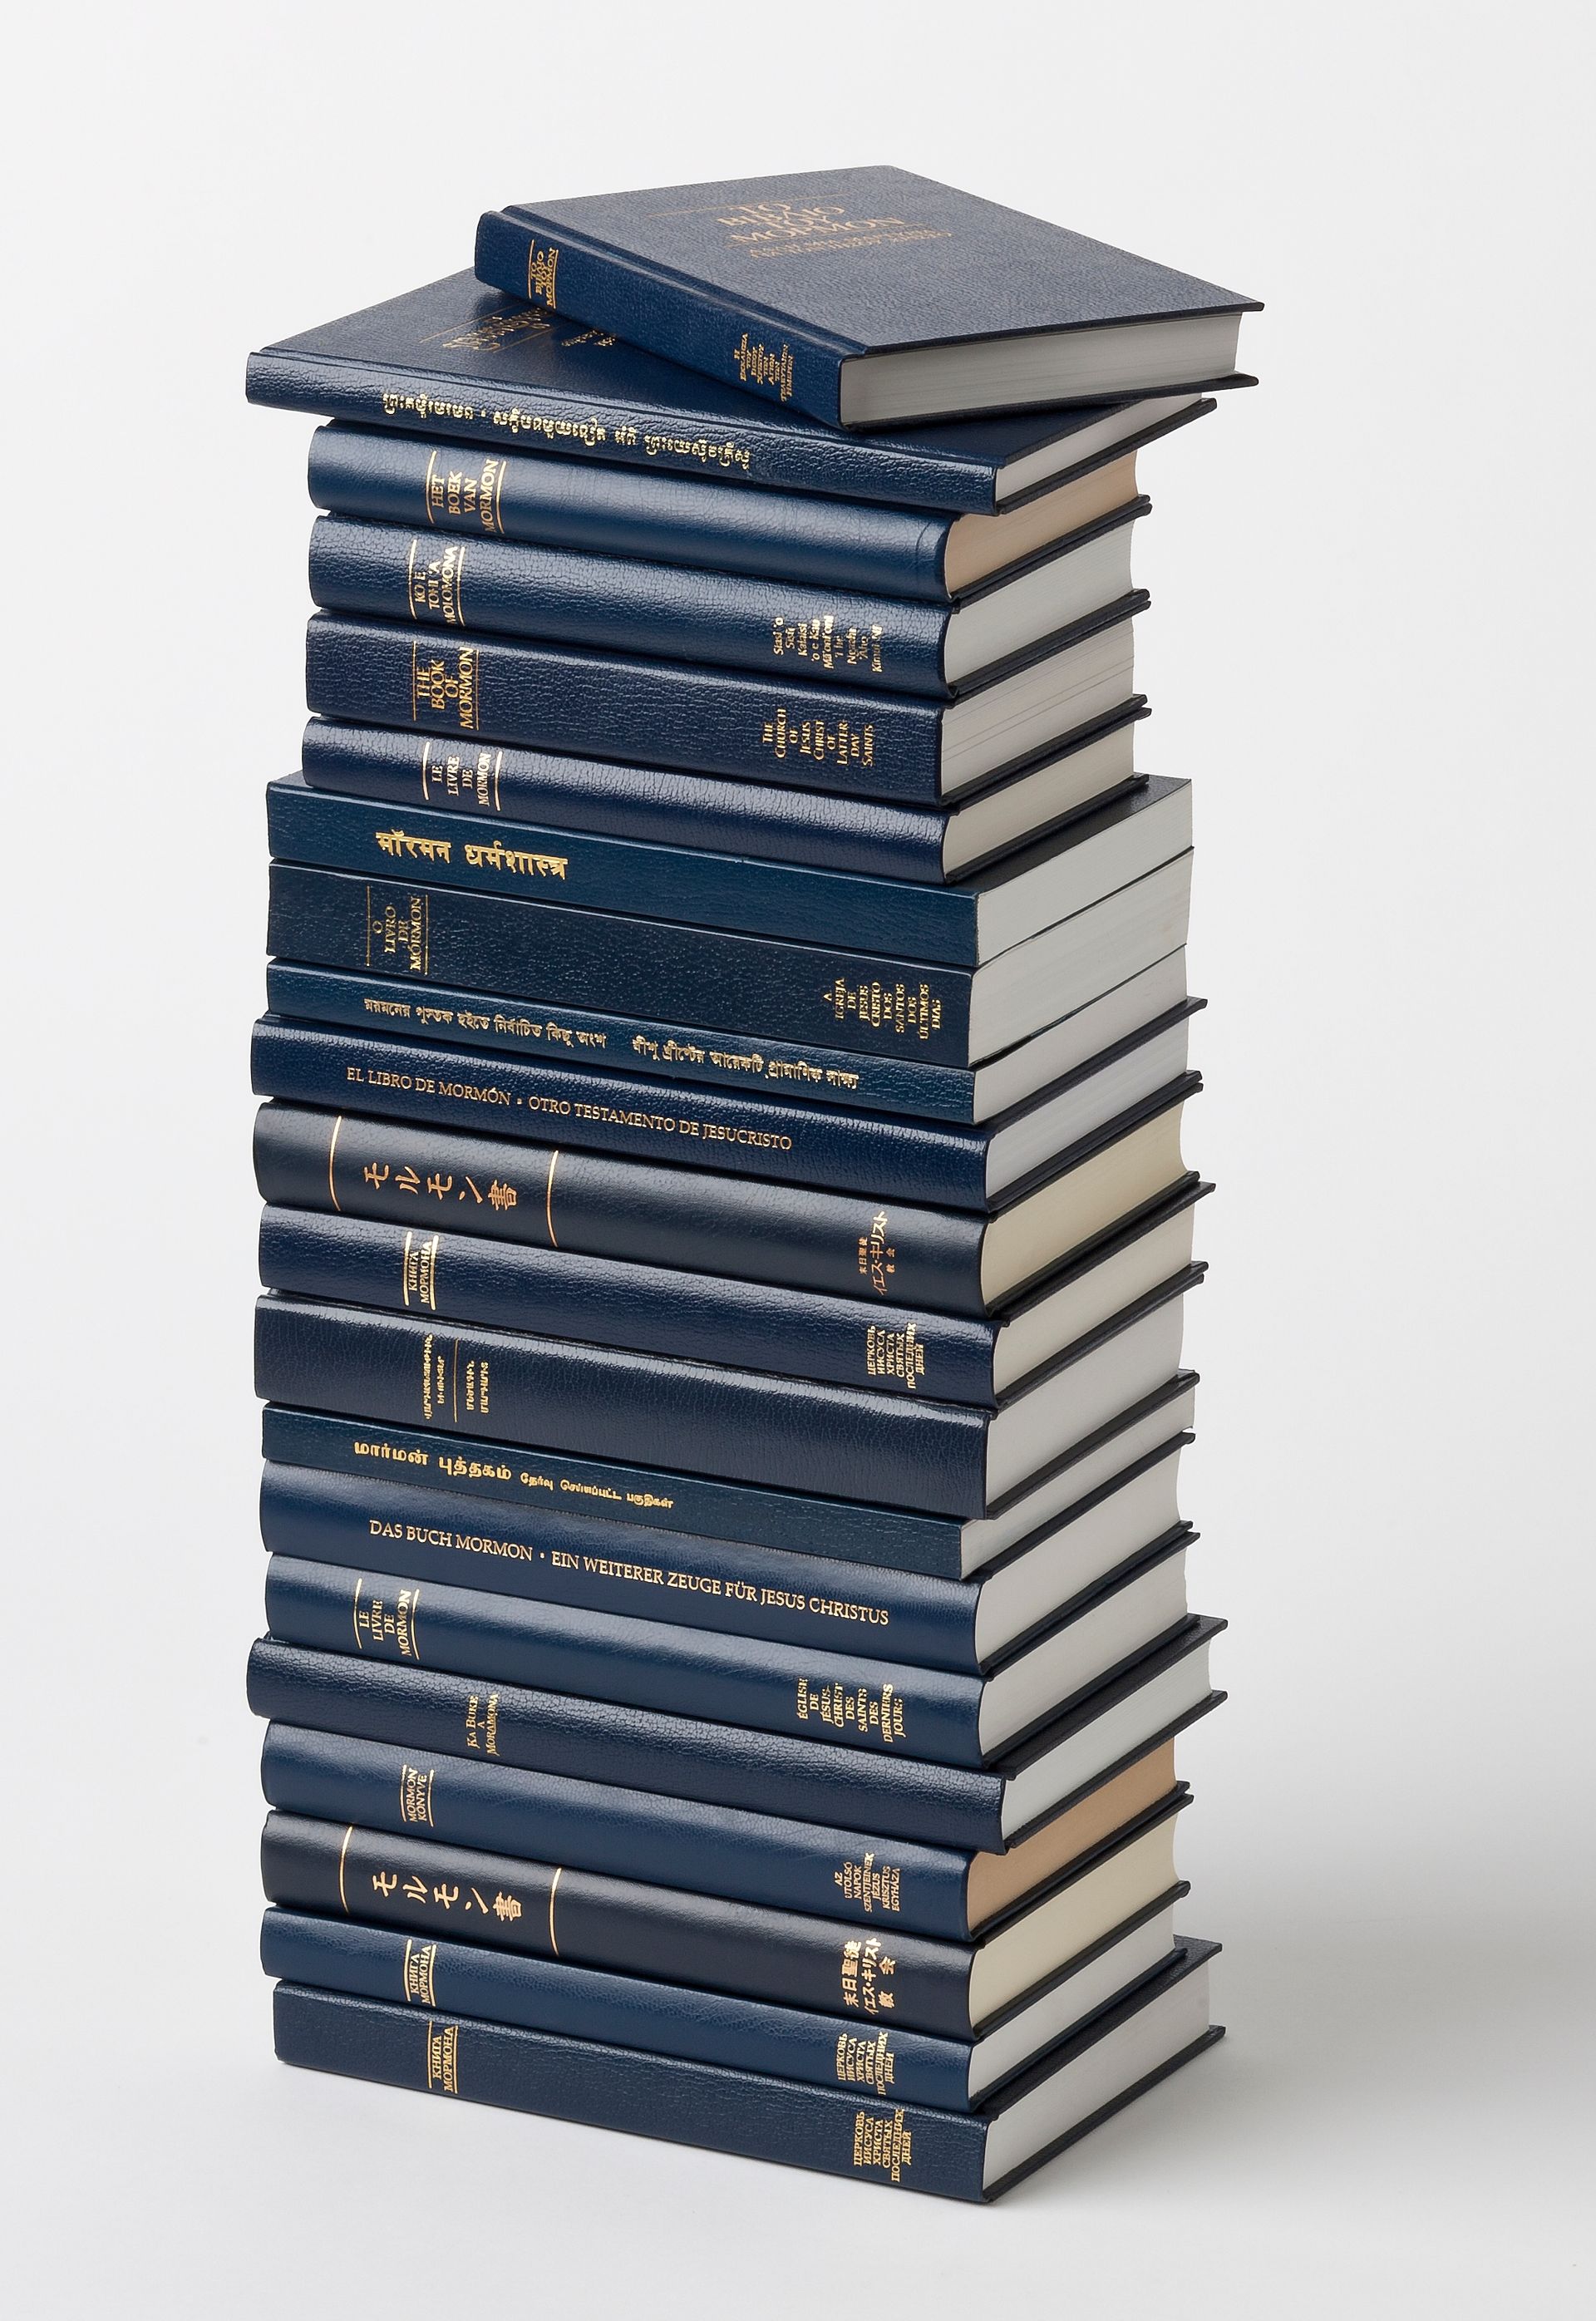 A stack of 21 copies of the Book of Mormon.